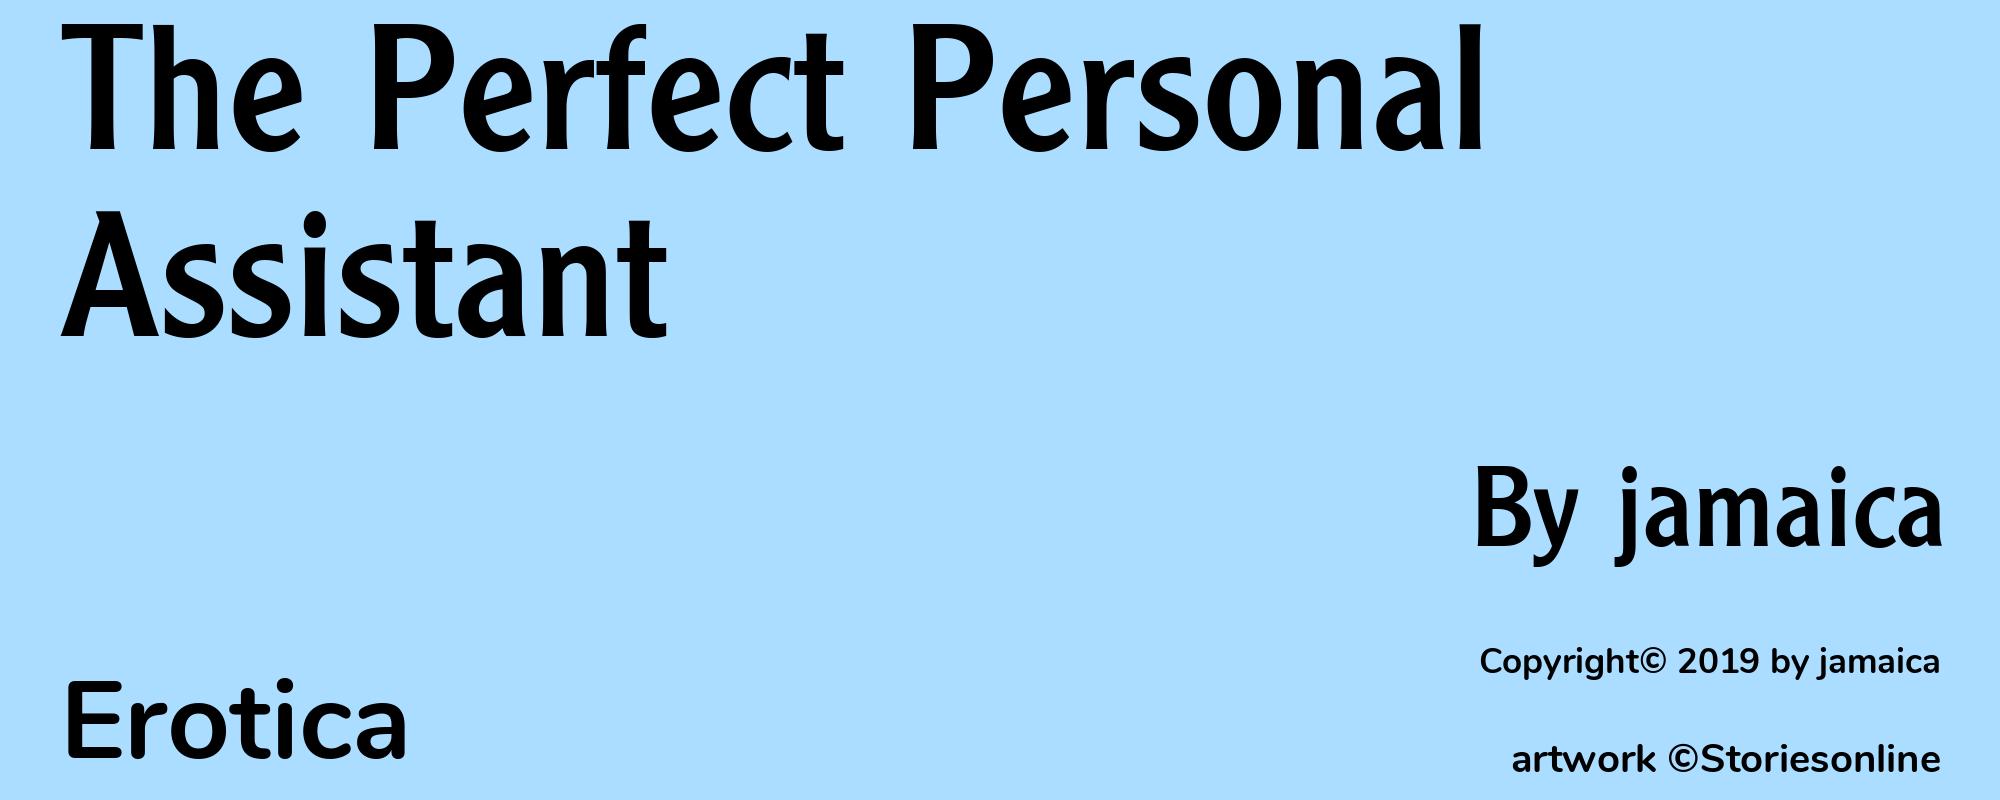 The Perfect Personal Assistant - Cover